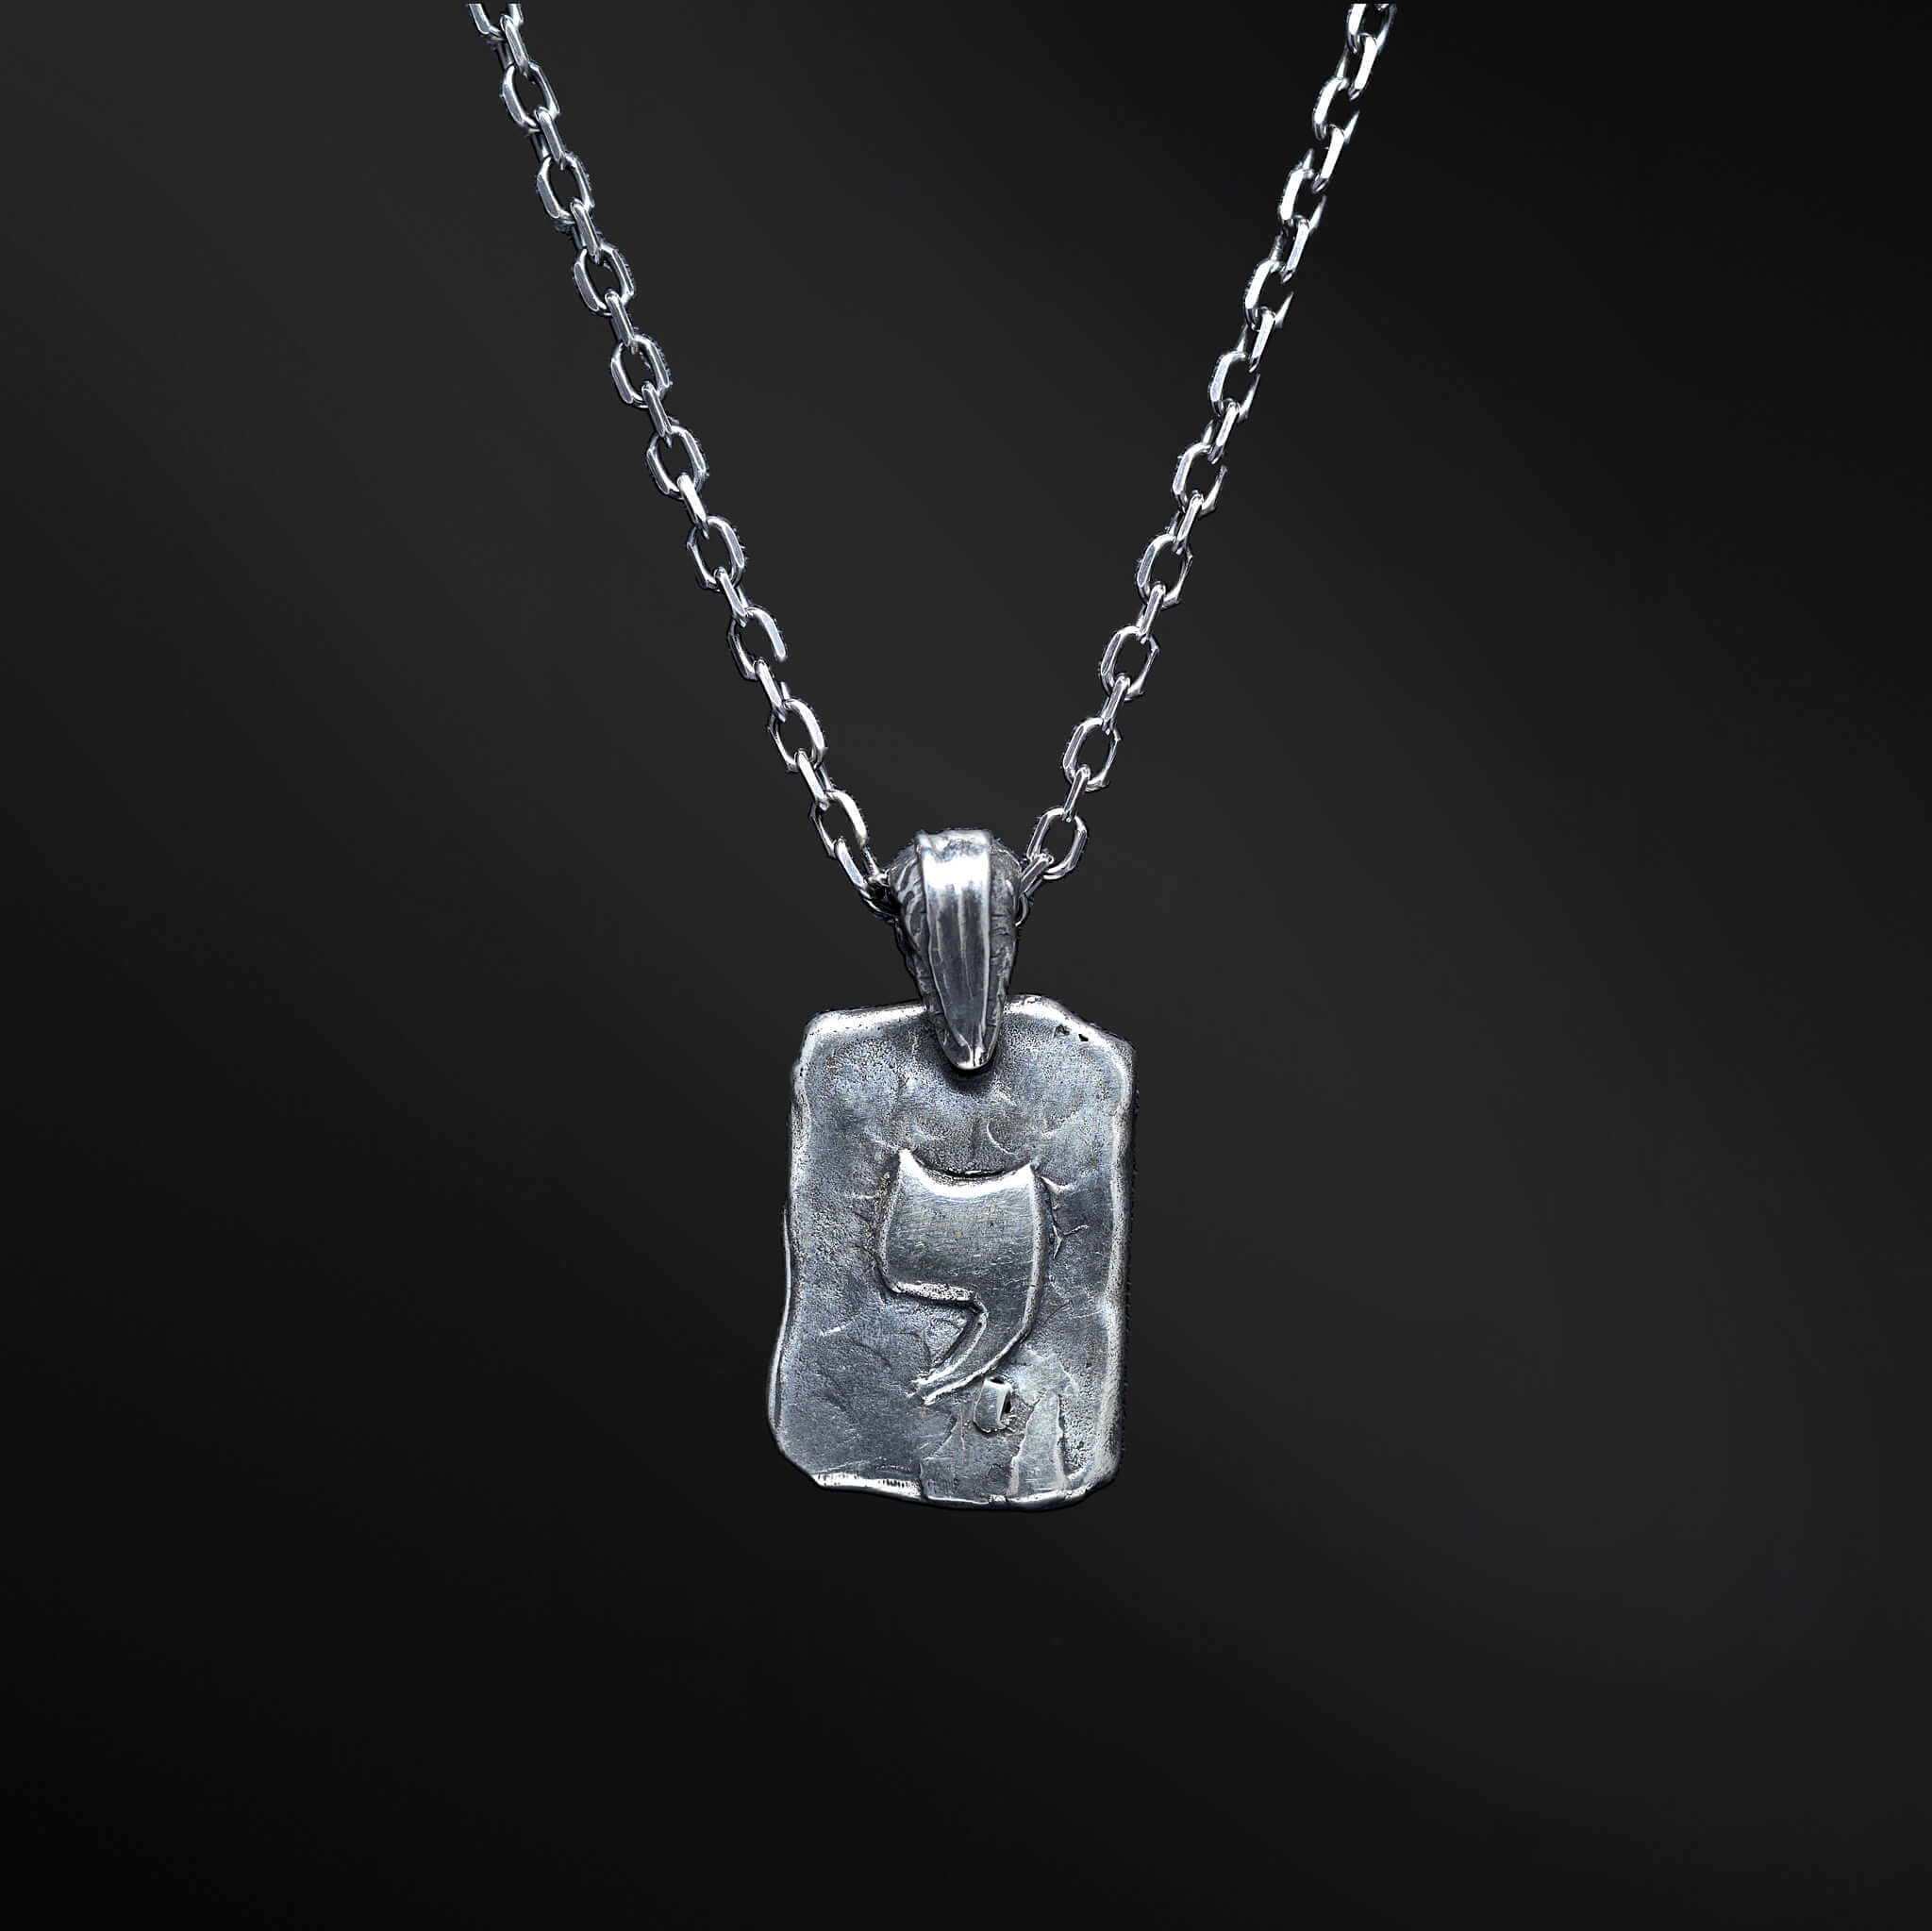 Youd Necklace: A representation of the exquisite Youd necklace, celebrating the sacred energy of the Hebrew letter &